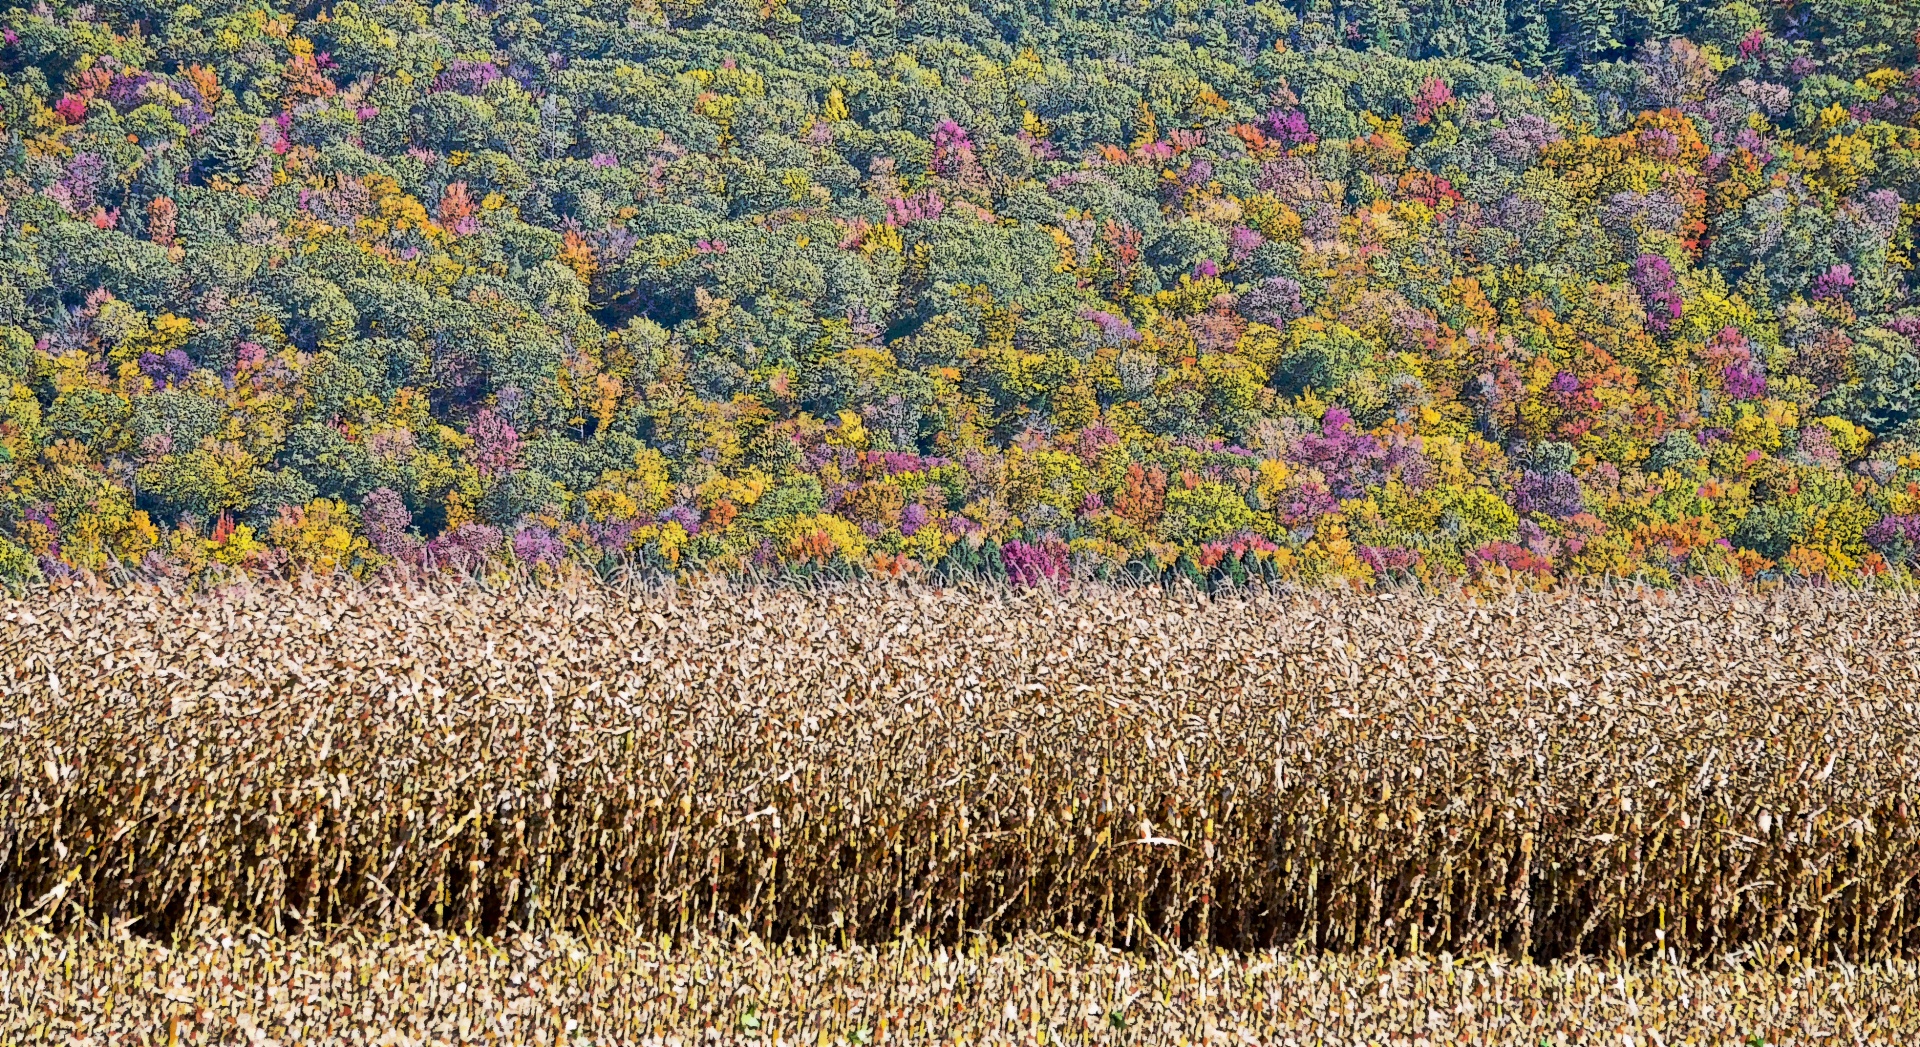 Corn field at base of mountains ablaze with autumn colors